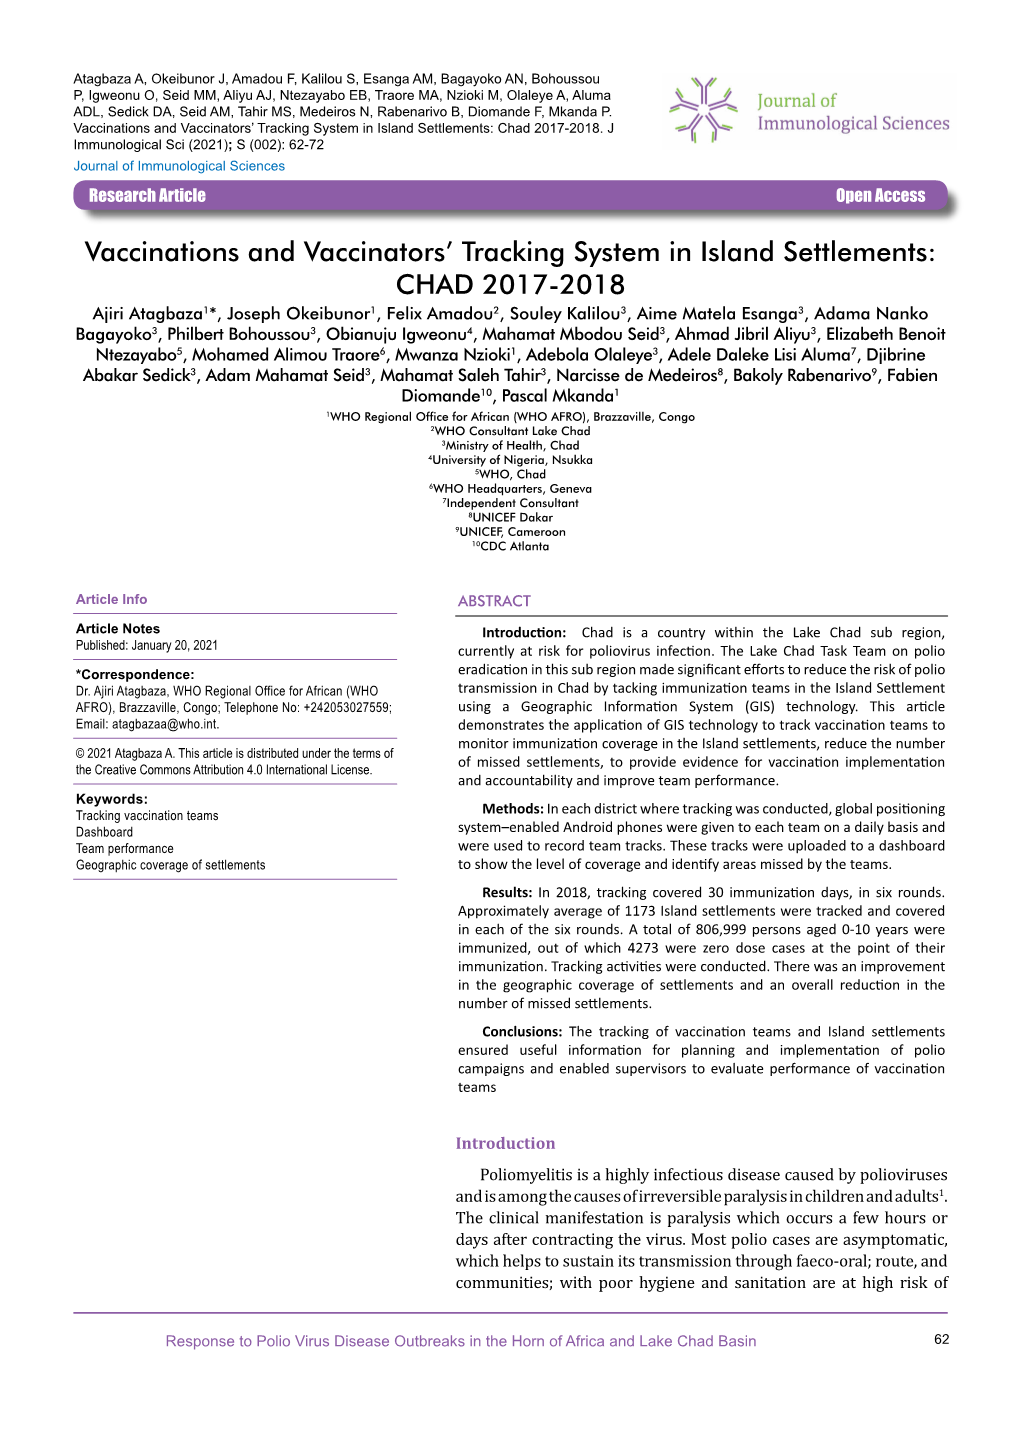 Vaccinations and Vaccinators' Tracking System in Island Settlements